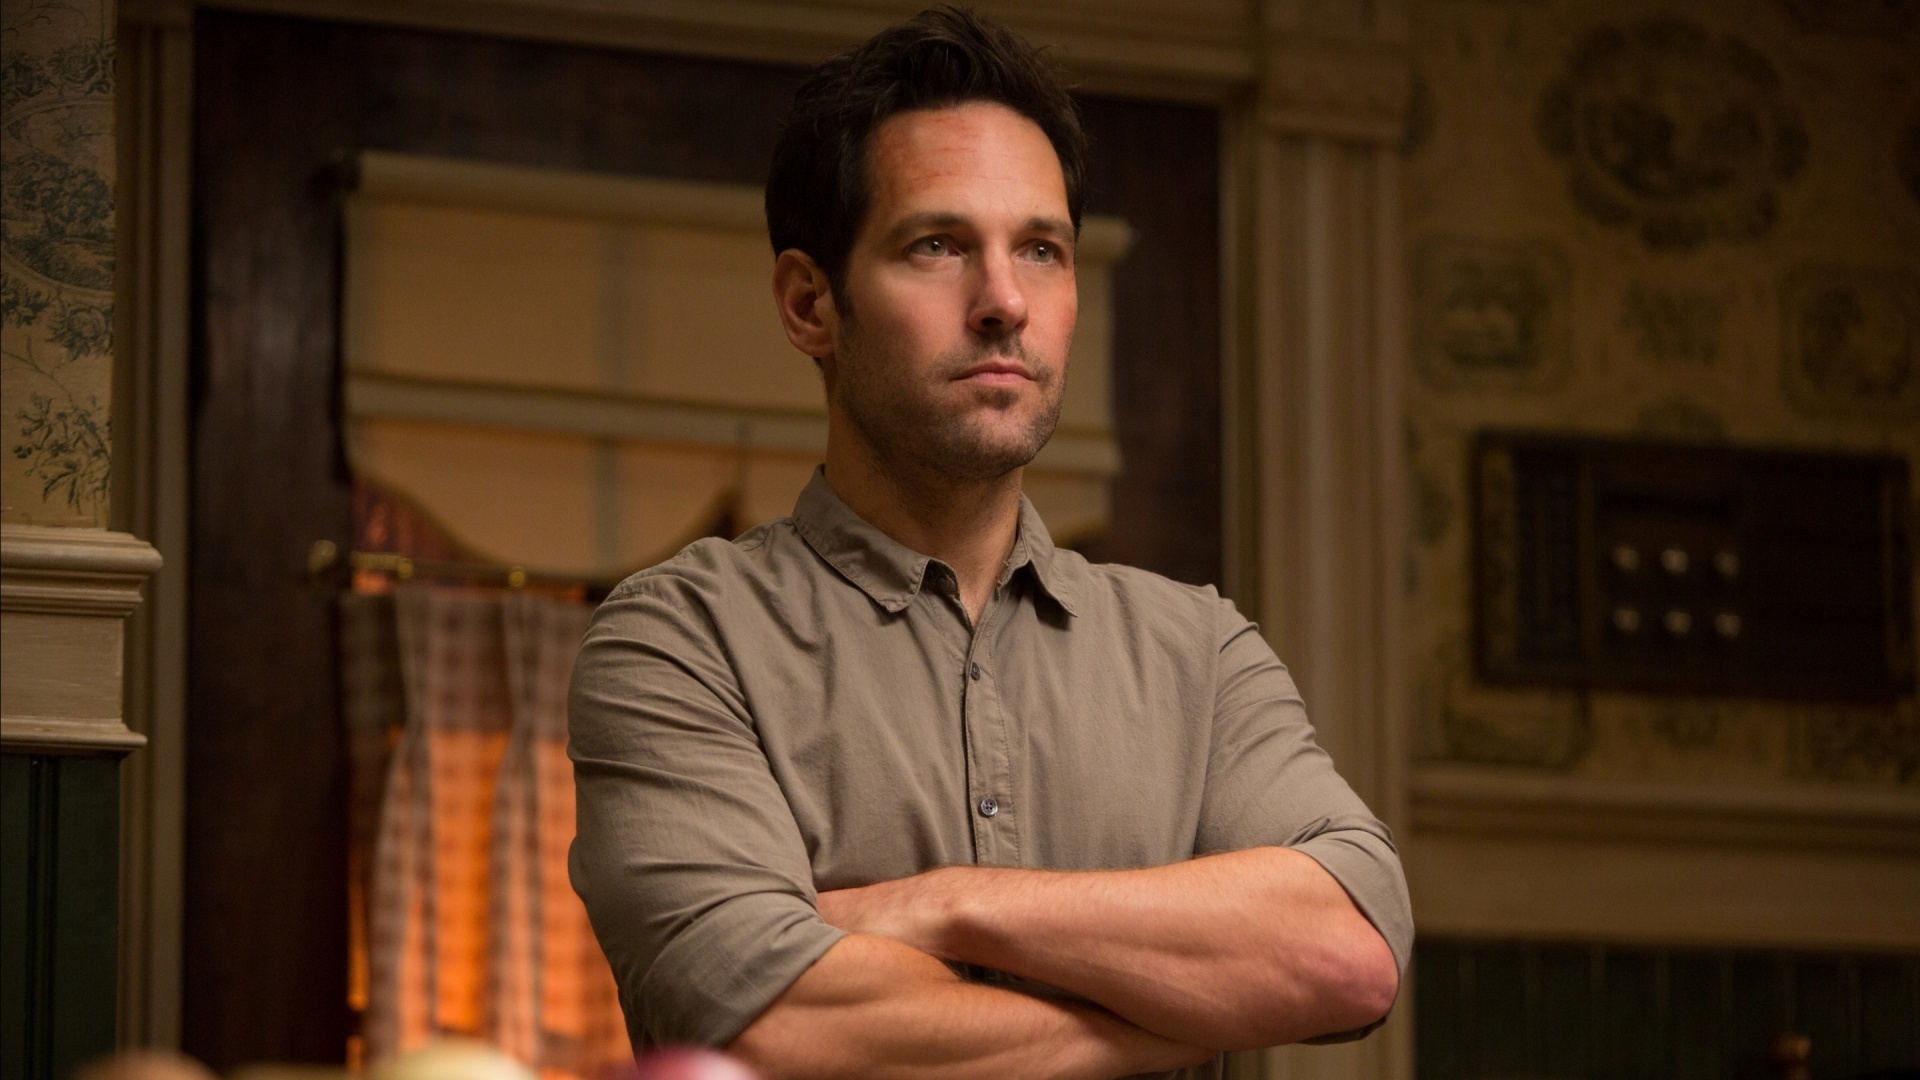 Paul Rudd wallpapers, Posted by John Sellers, Actor backgrounds, Movie posters, 1920x1080 Full HD Desktop